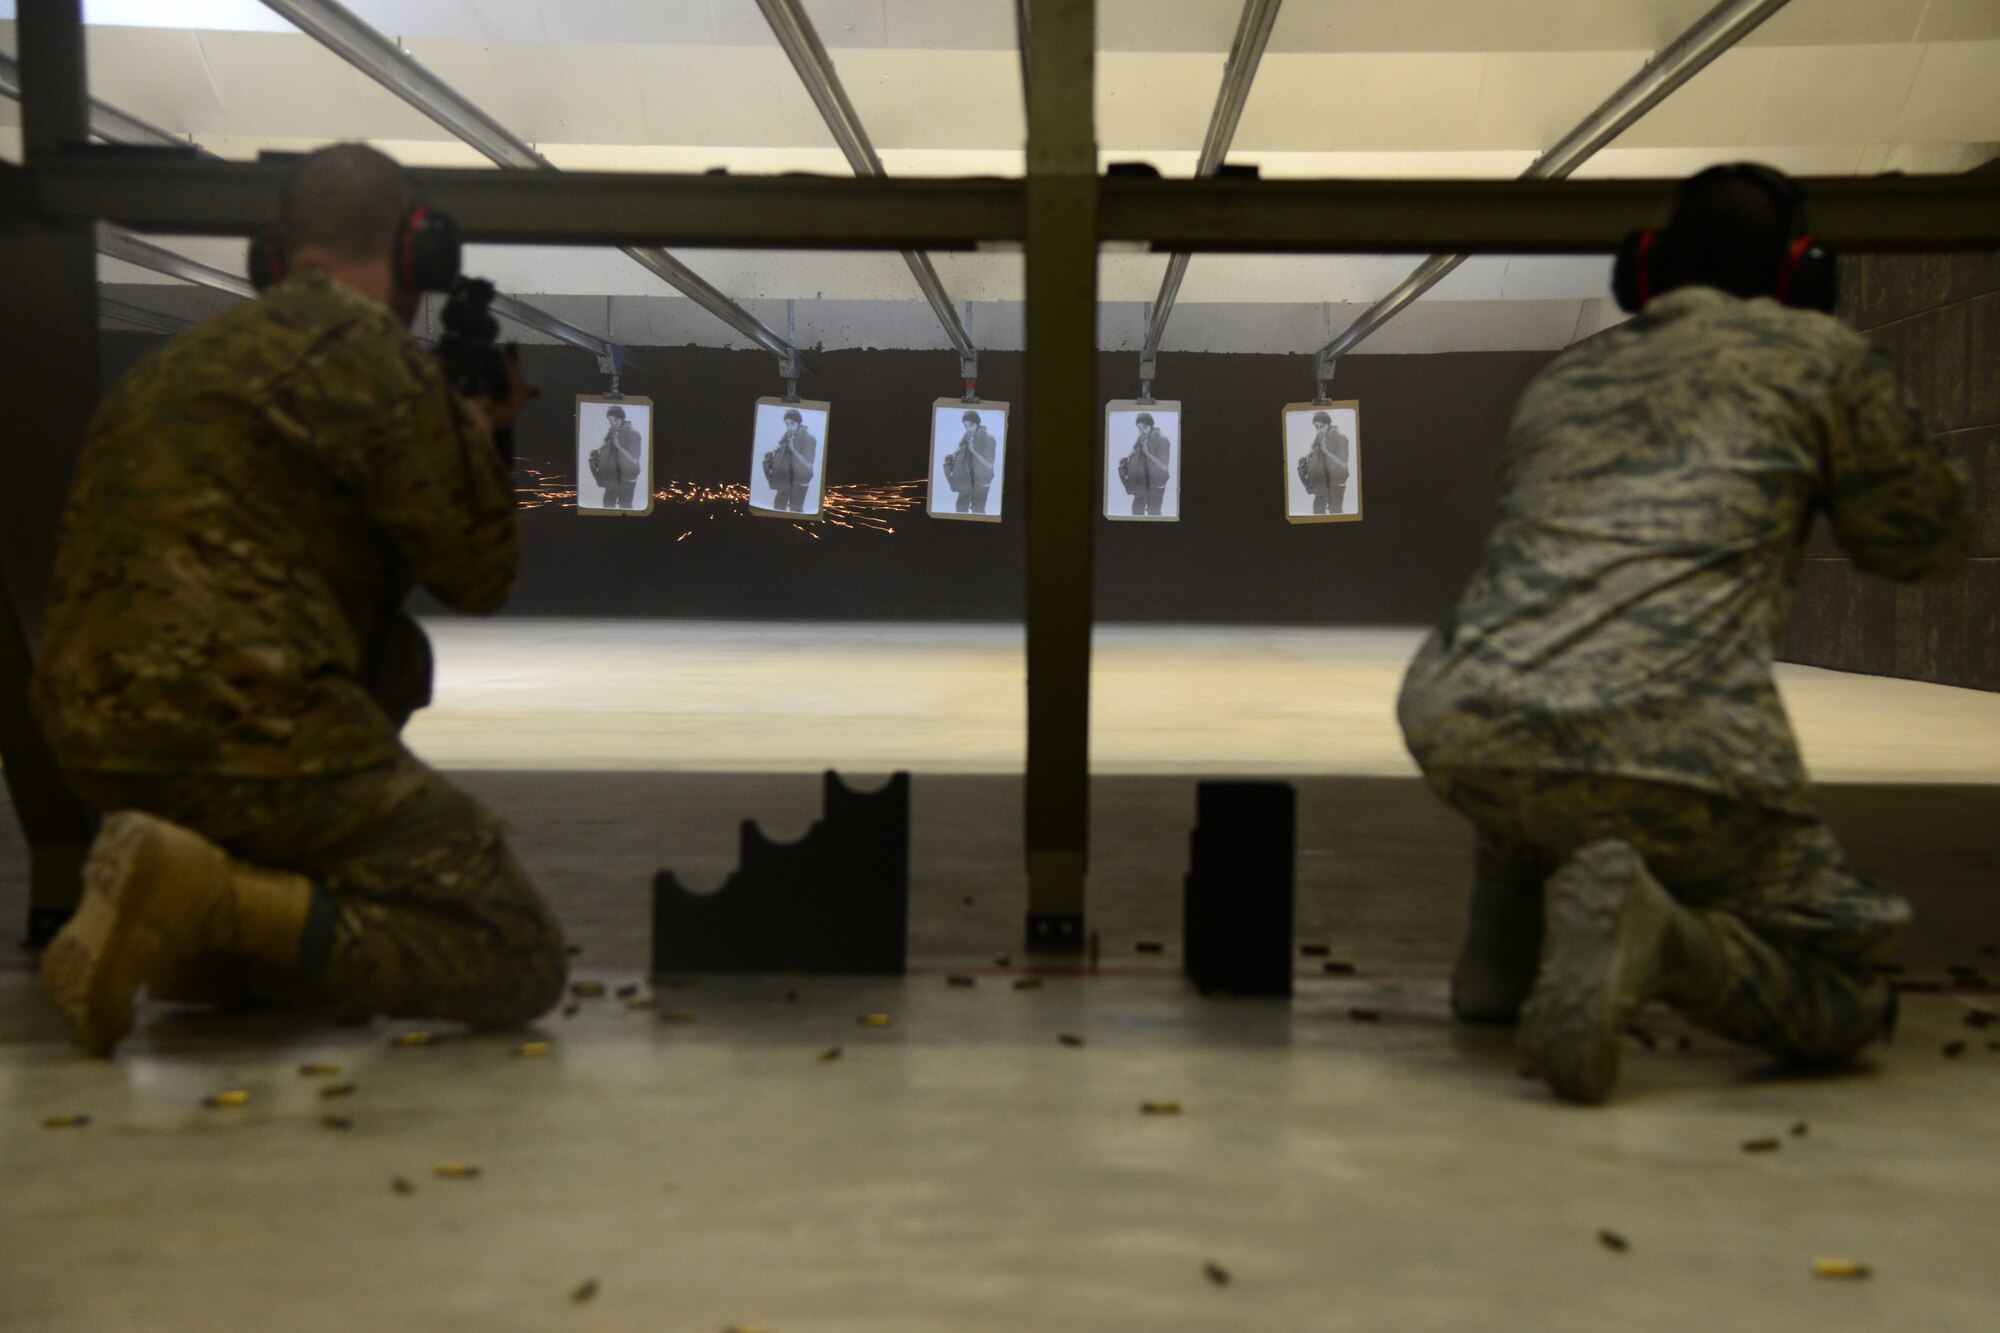 Servicemembers assigned to the Special Operations Command Central Forward, qualify on the M-4 carbine rifle at Al Udeid Air Base, Qatar, Oct. 15, 2014. Servicemembers are required to qualify prior to a deployment, and include being able to use the techniques from four stationary positions: lying down with a support, lying down without a support, kneeling with a support and standing behind a barricade. (U.S. Air Force photo by Staff Sgt. Ciara Wymbs)